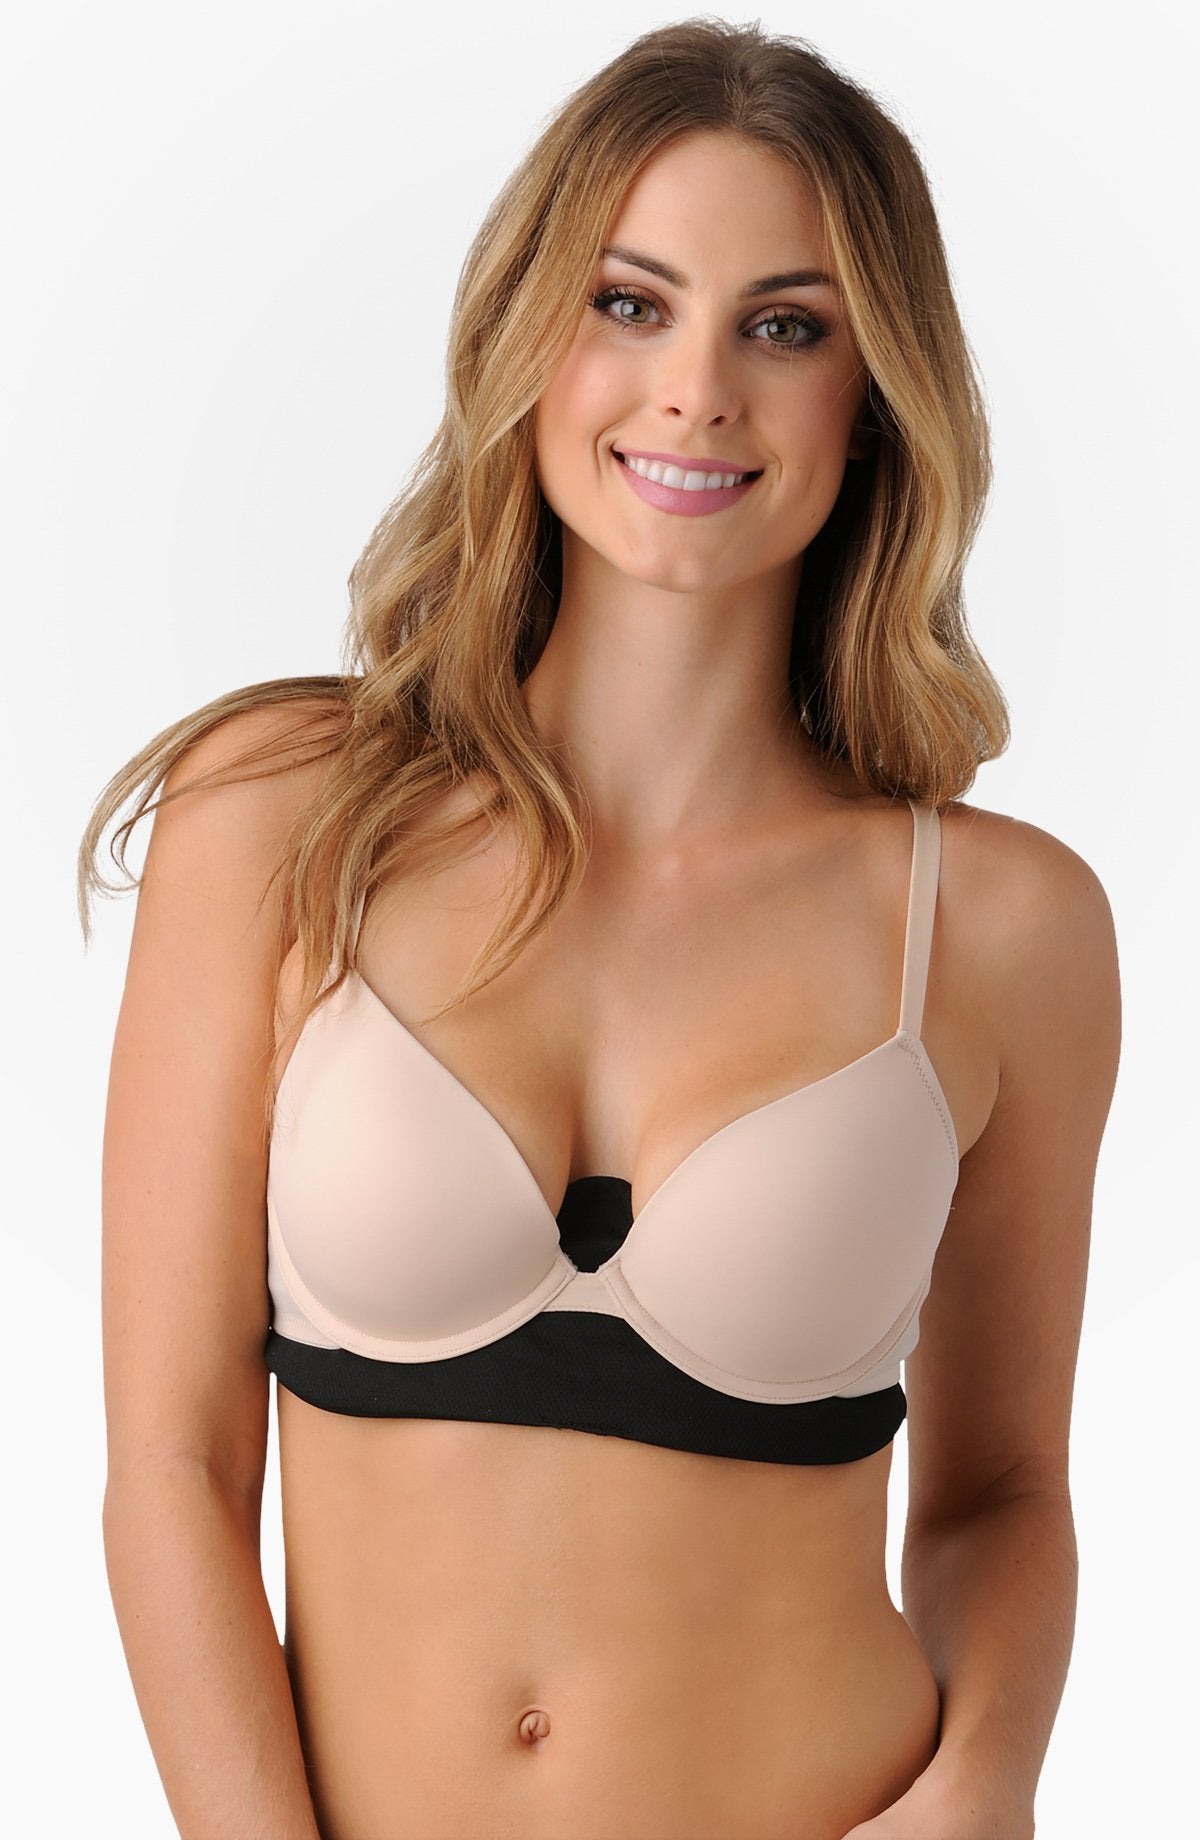 prevent sweat marks with these discrete bra liners! #bra #brareview #m